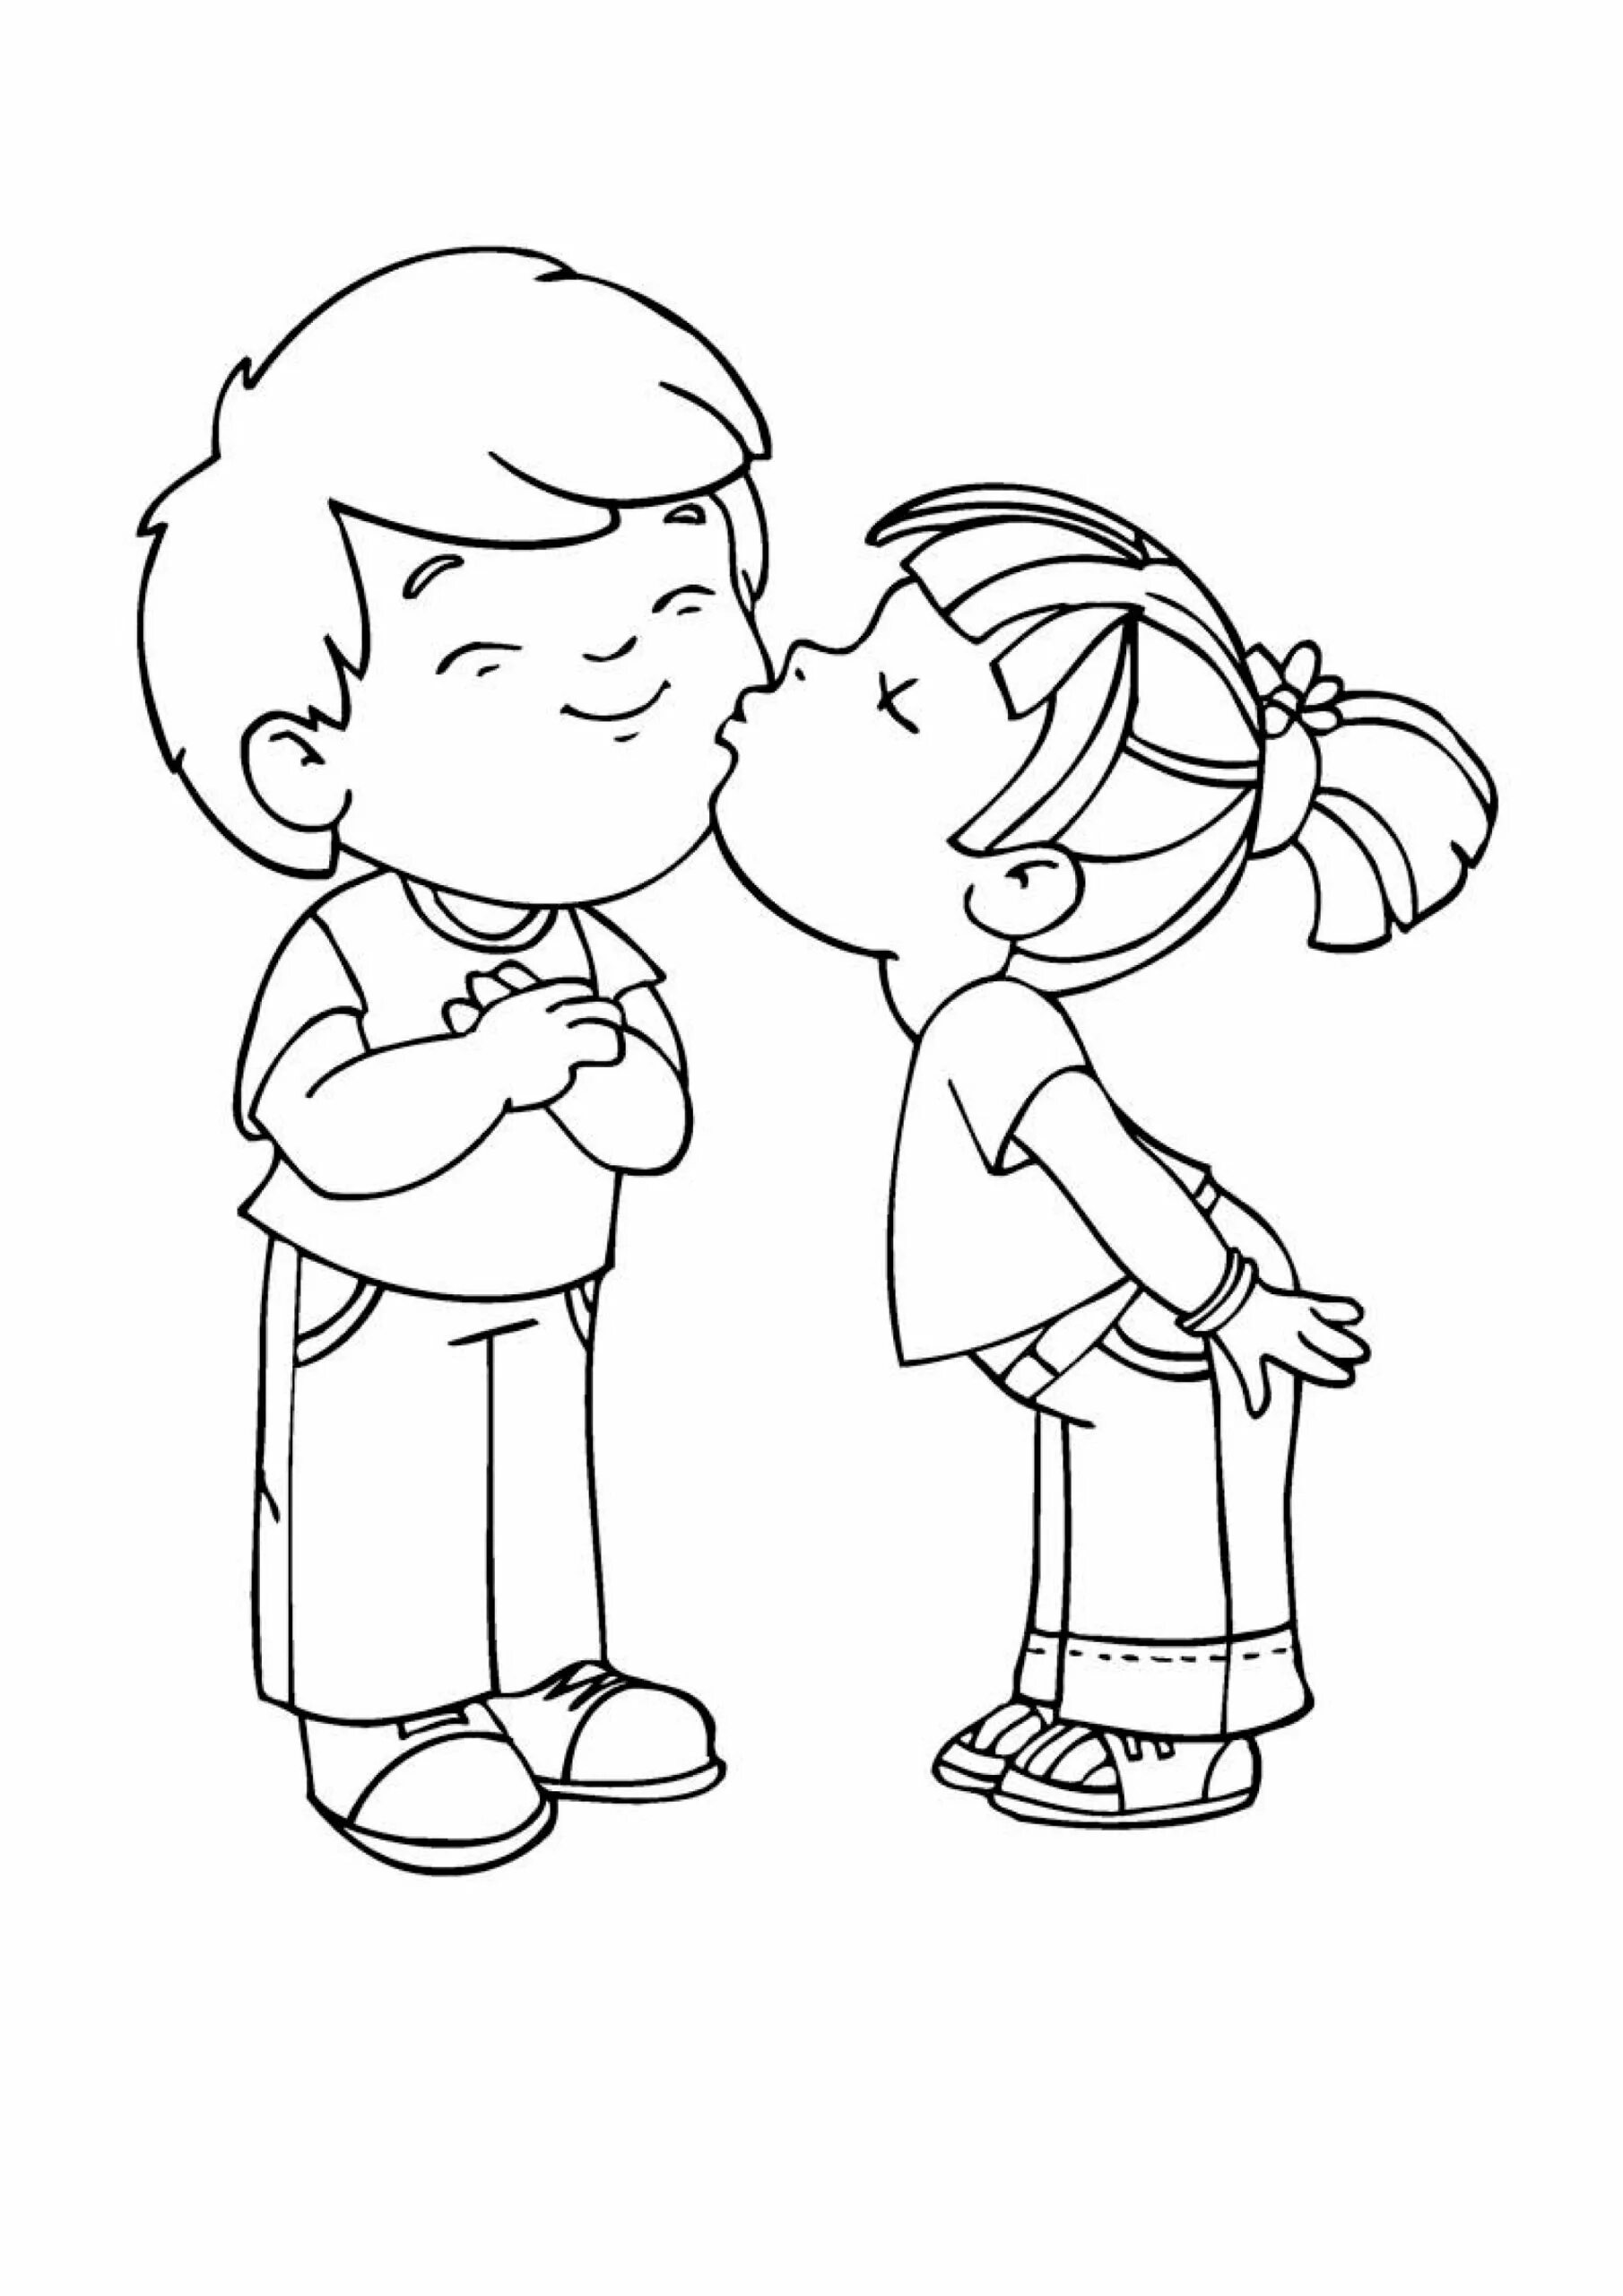 Brother and sister coloring pages